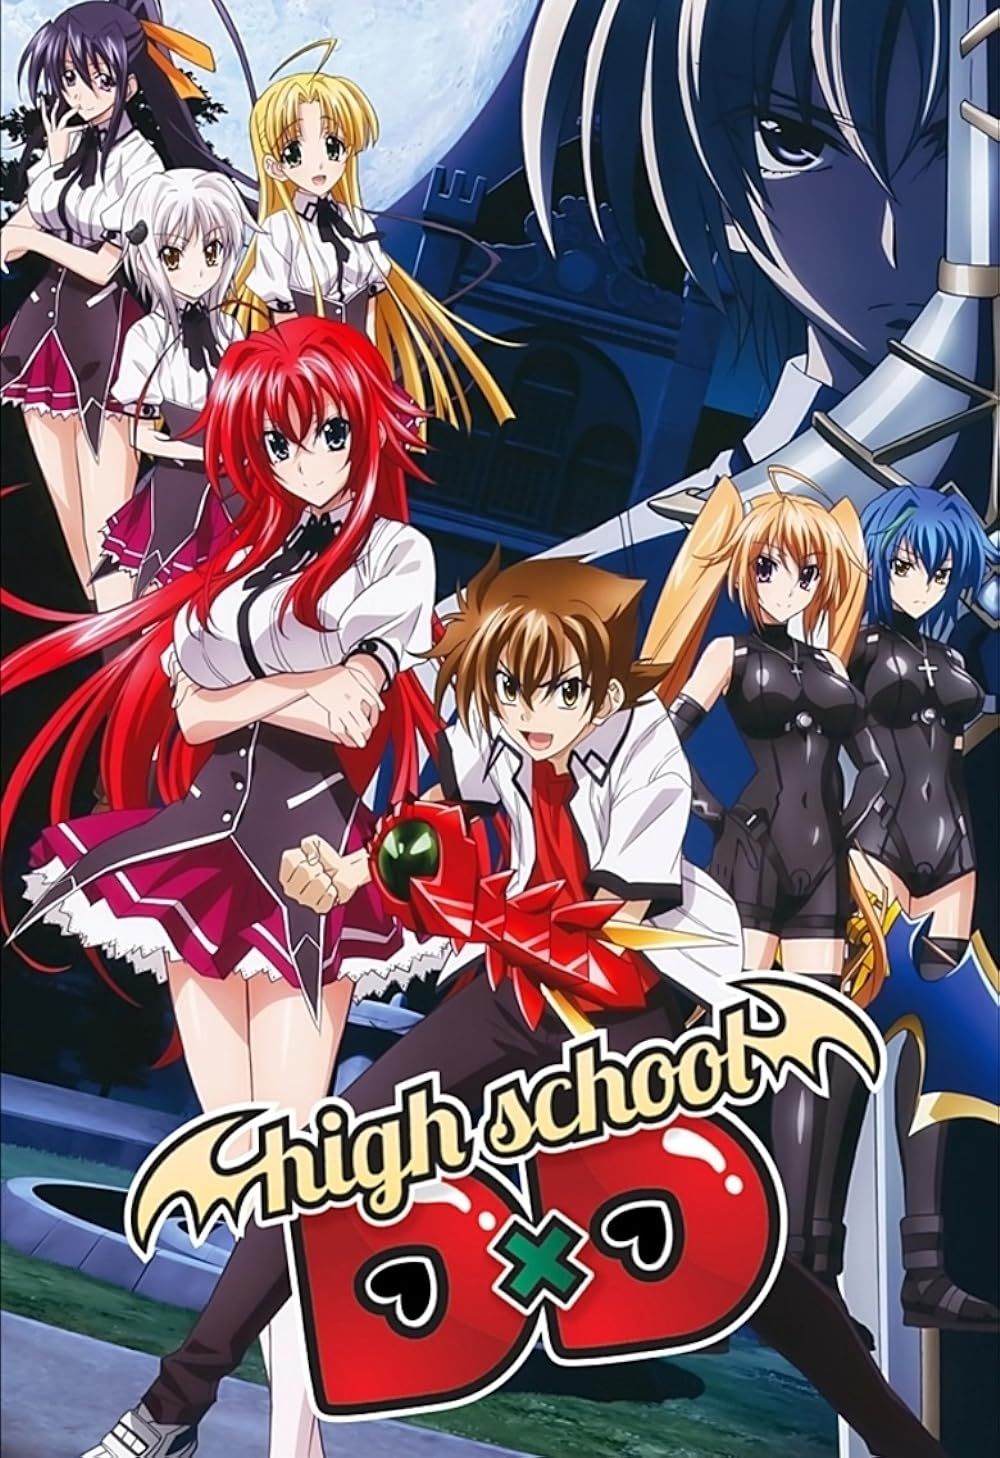 The Cast of High School DxD Looks toward the Viewer